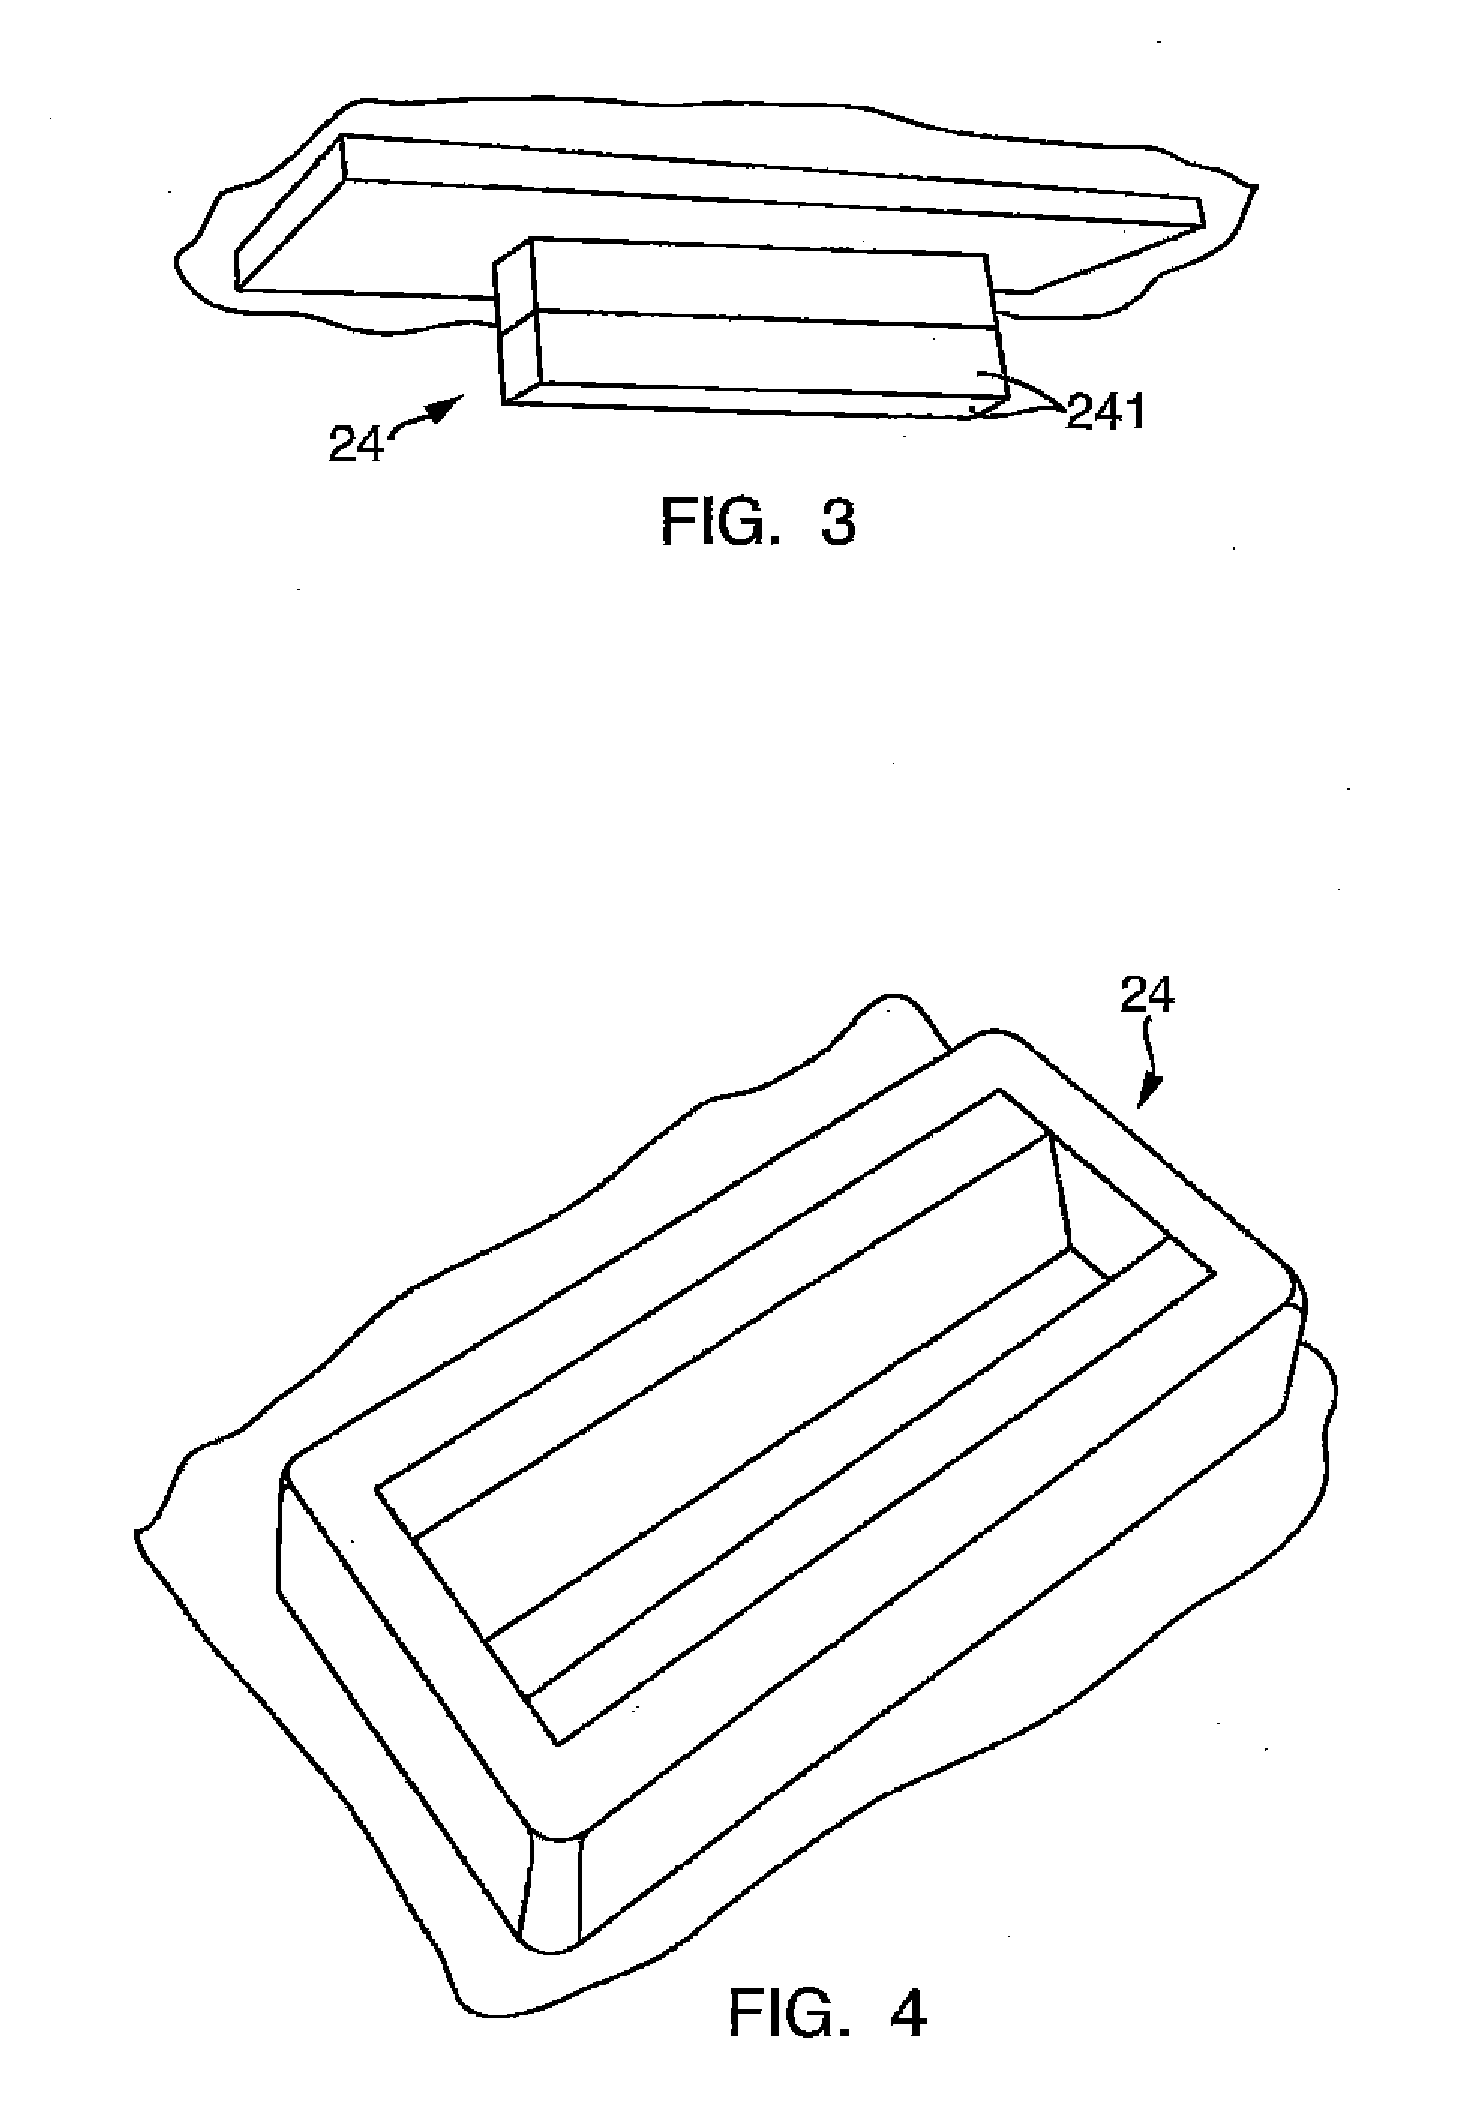 Method of manufacturing a composite insert